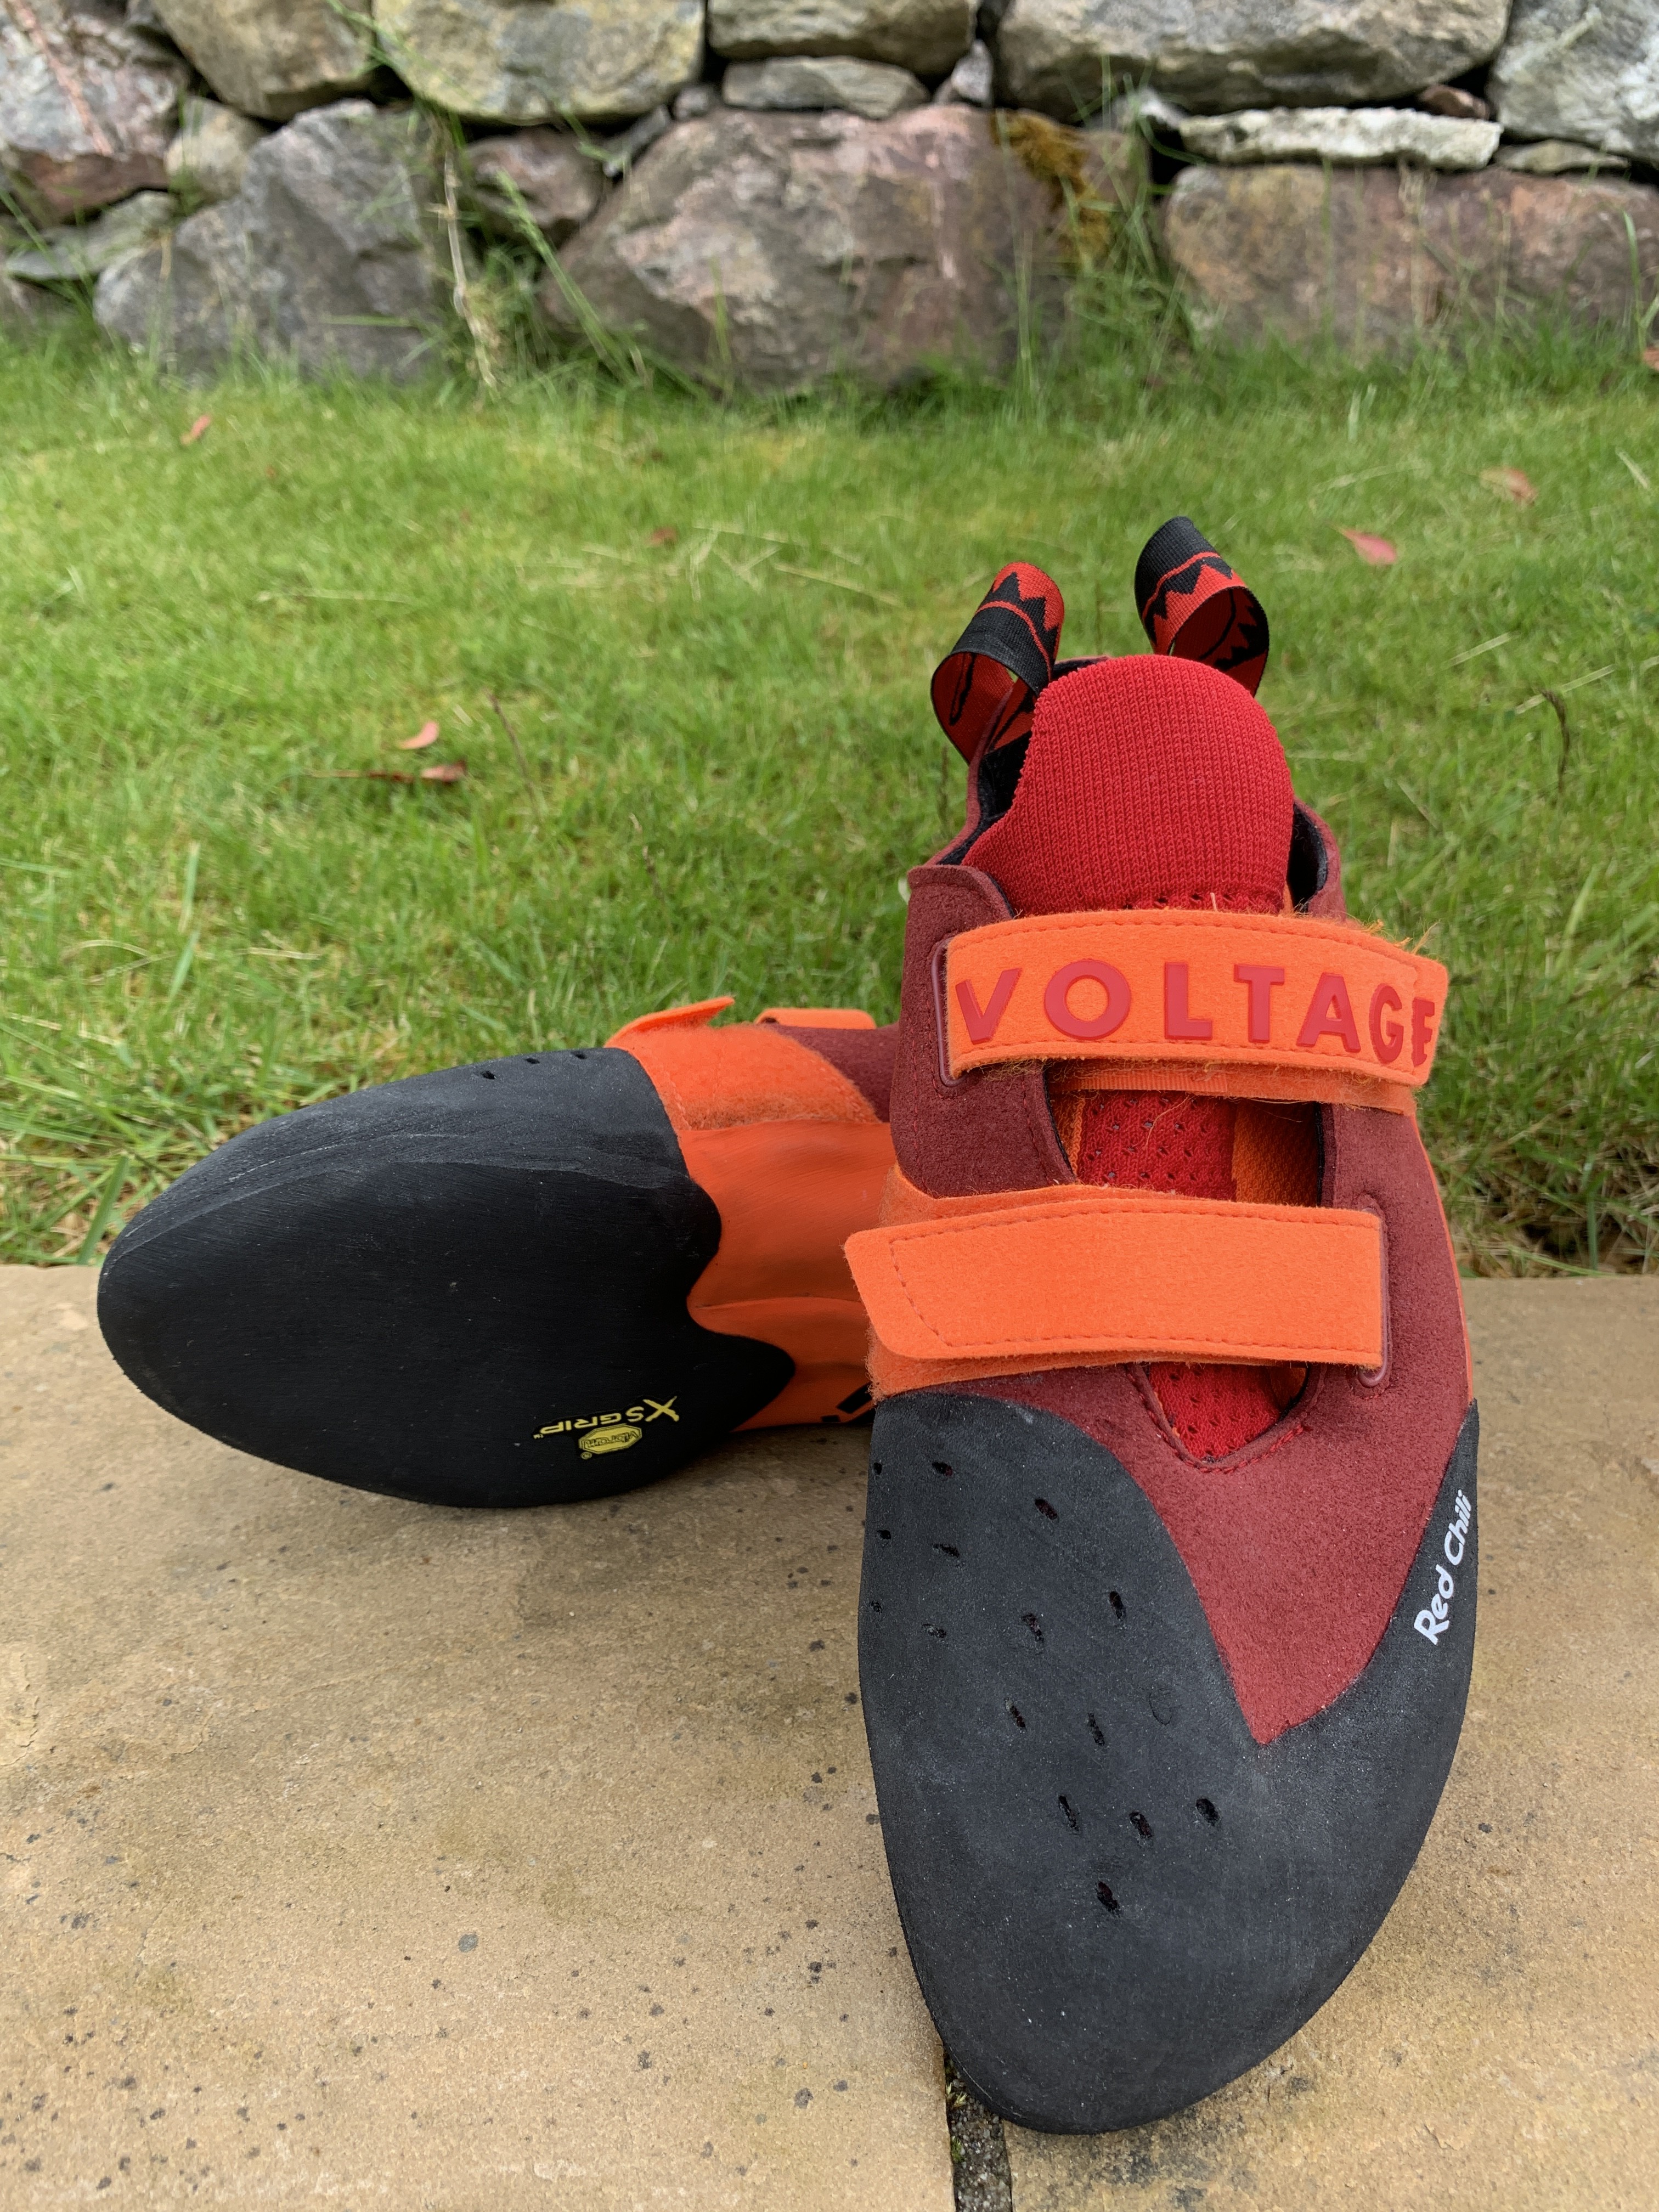 Red Chili Voltage LV II - Climbing Shoes, Free UK Delivery